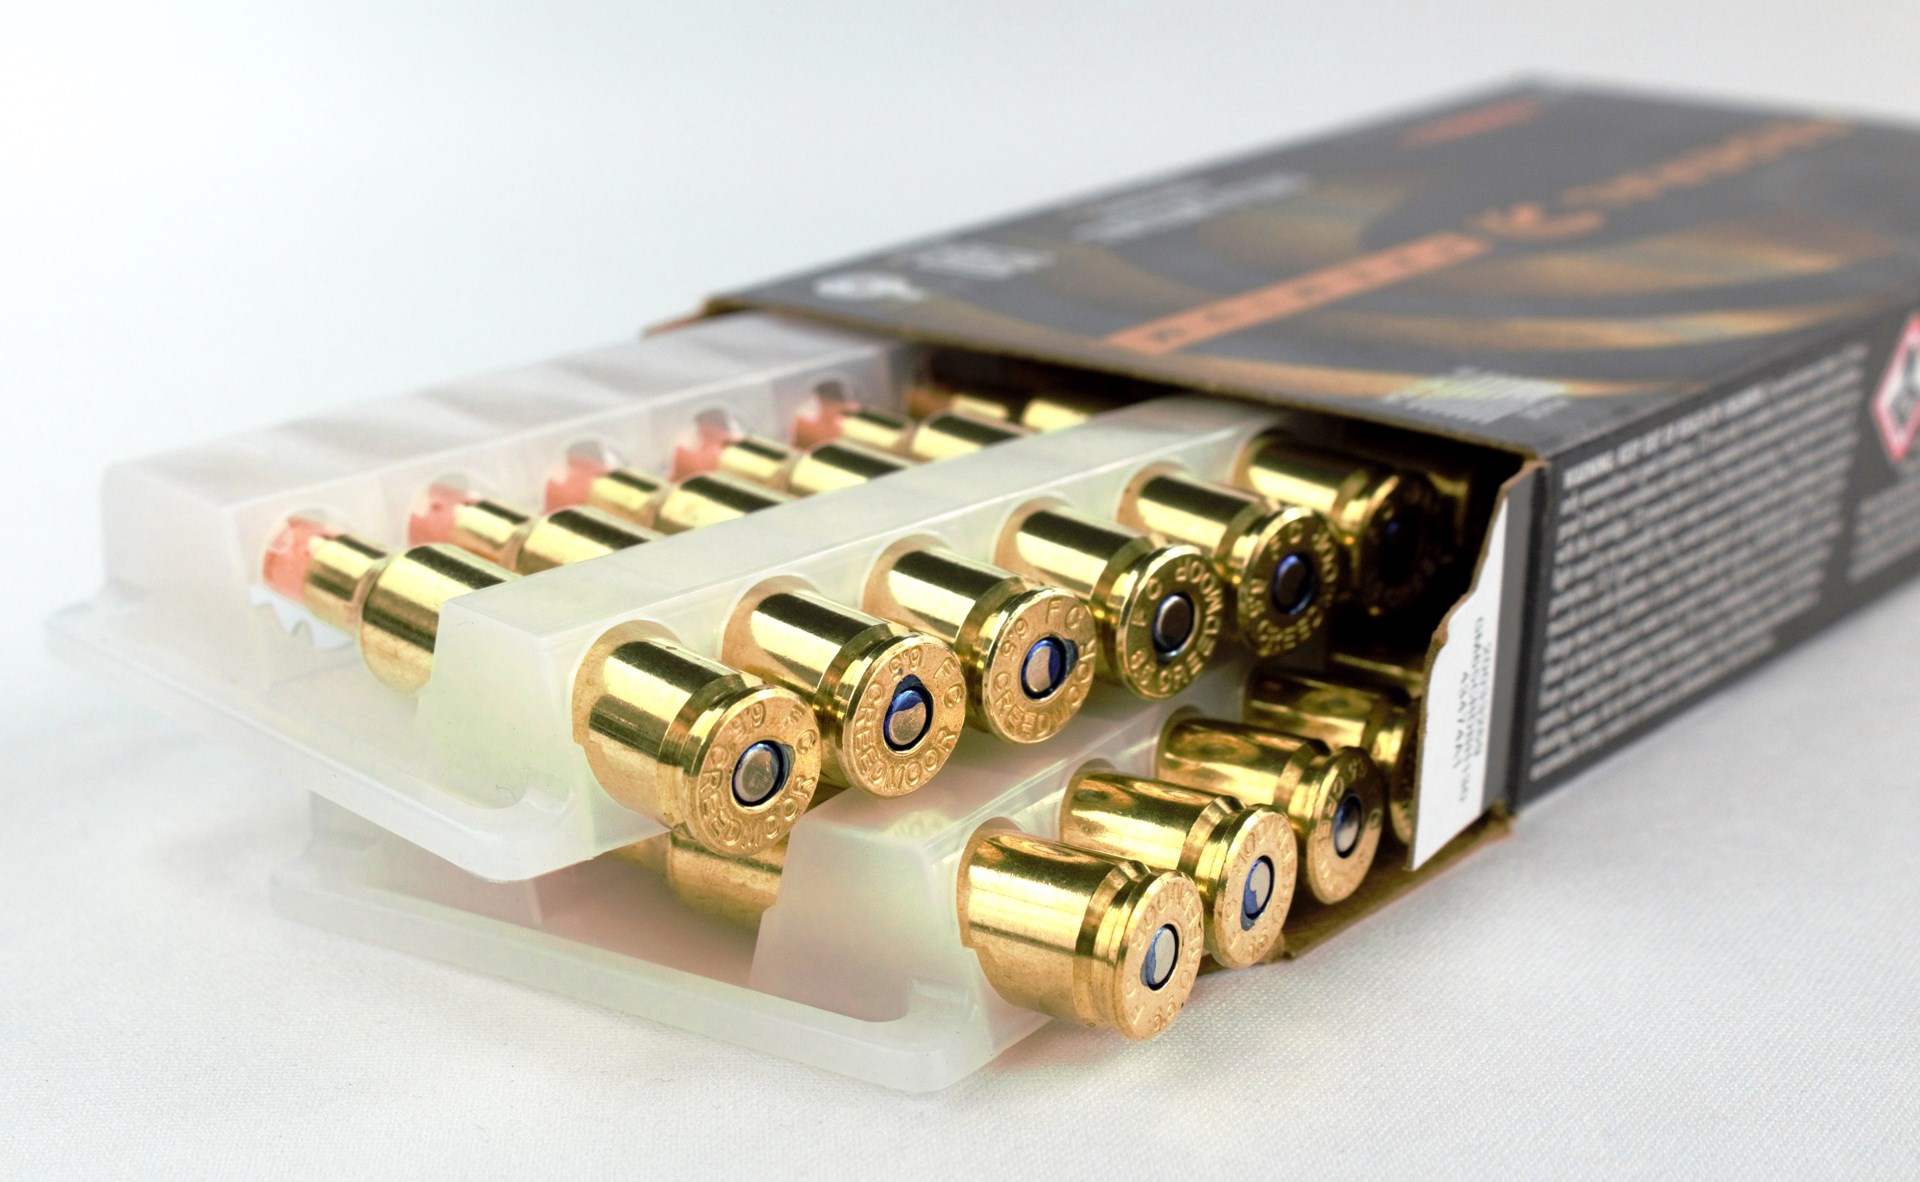 federal premium ammunition box opened arranged white background bullets cartridges brass cases plastic container